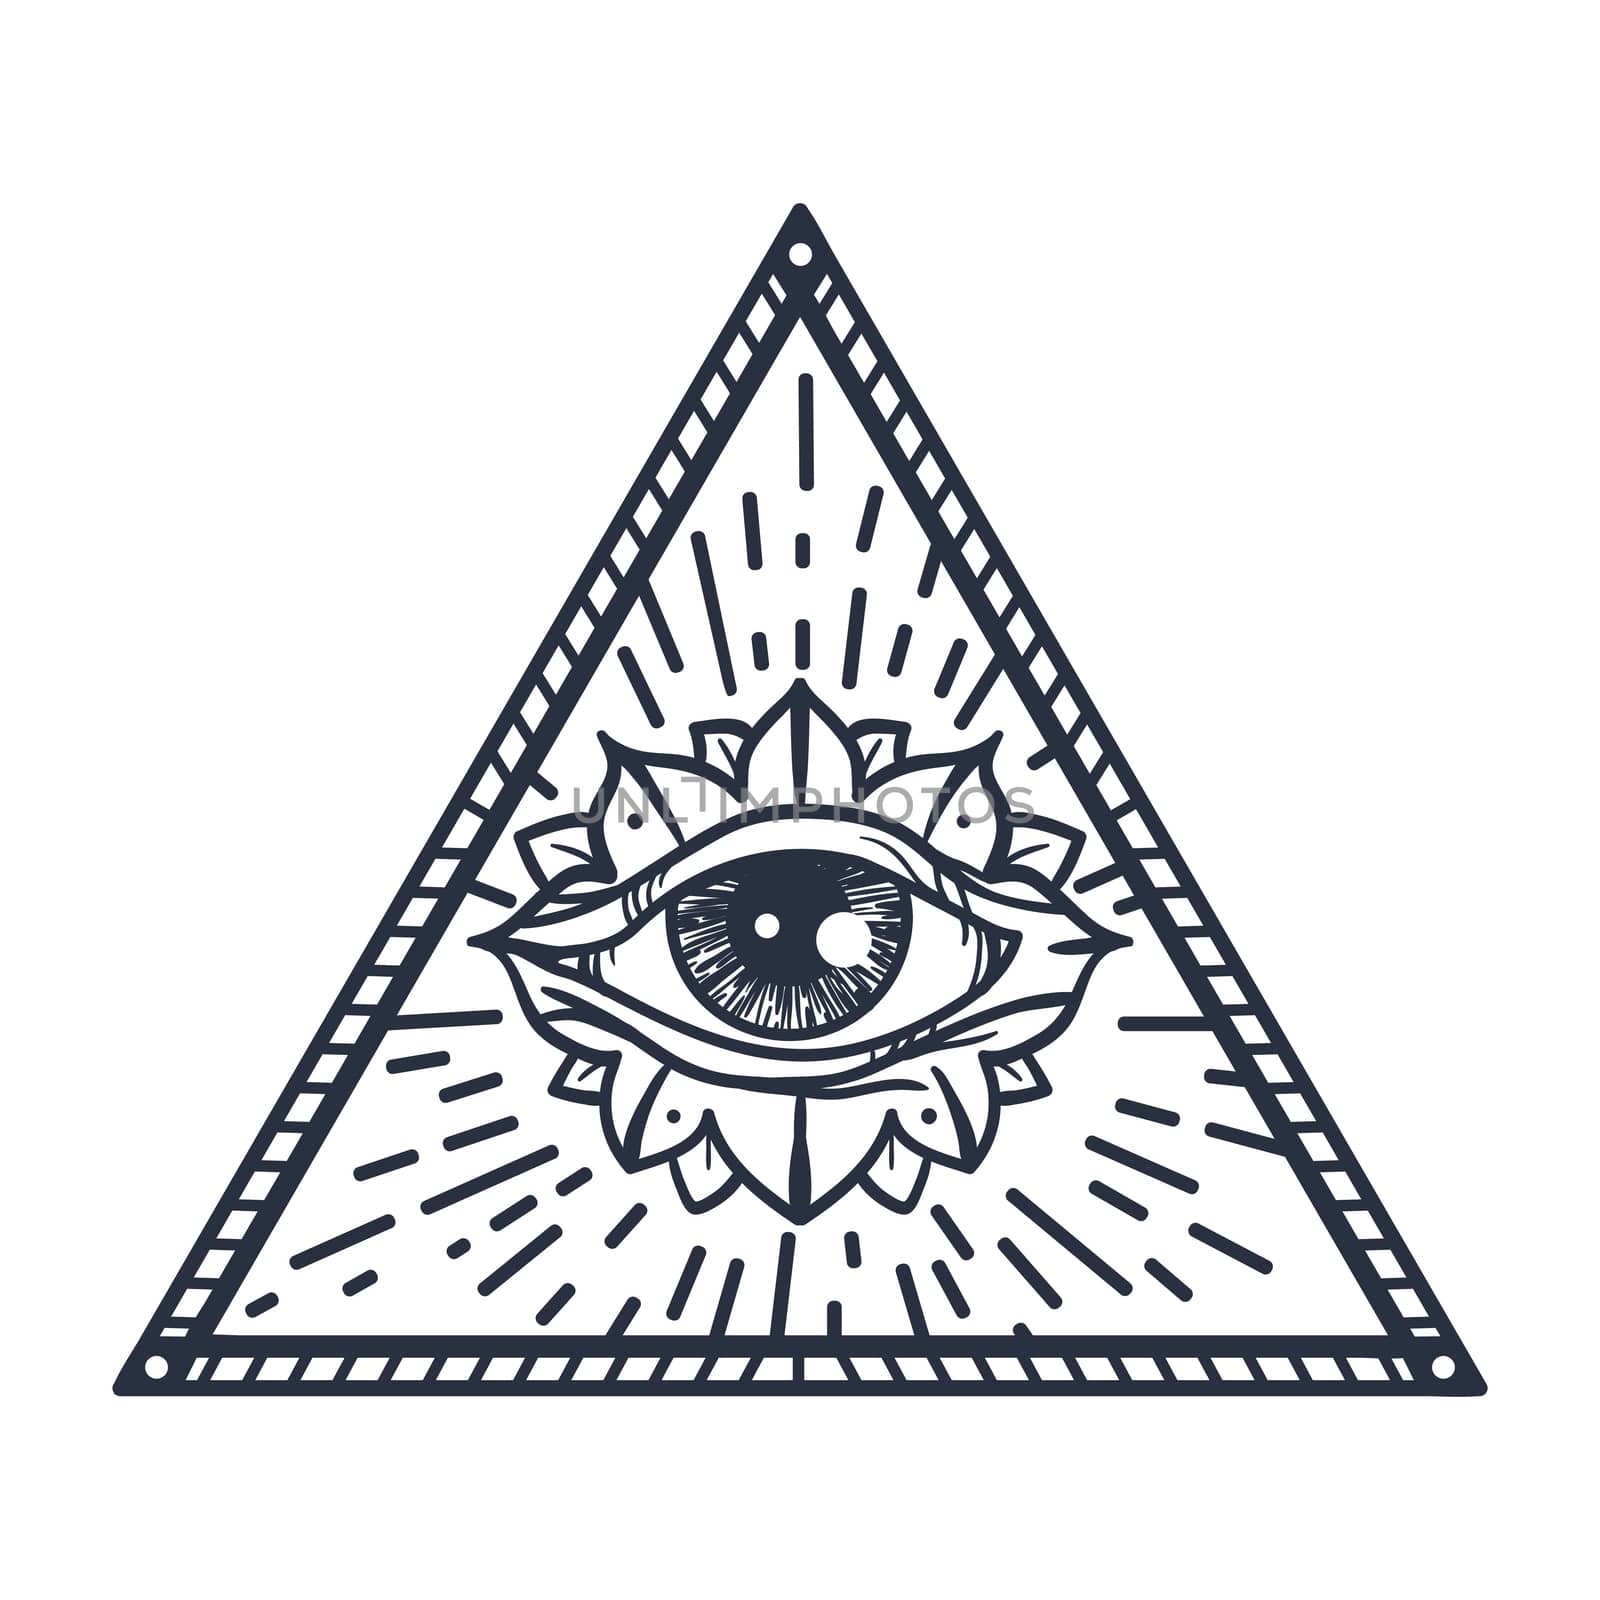 Vintage All Seeing Eye in Triangle. Providence magic symbol for print, tattoo, coloring book,fabric, t-shirt, cloth in boho style. Astrology, occult and tribal, esoteric and alchemy sign. Vector